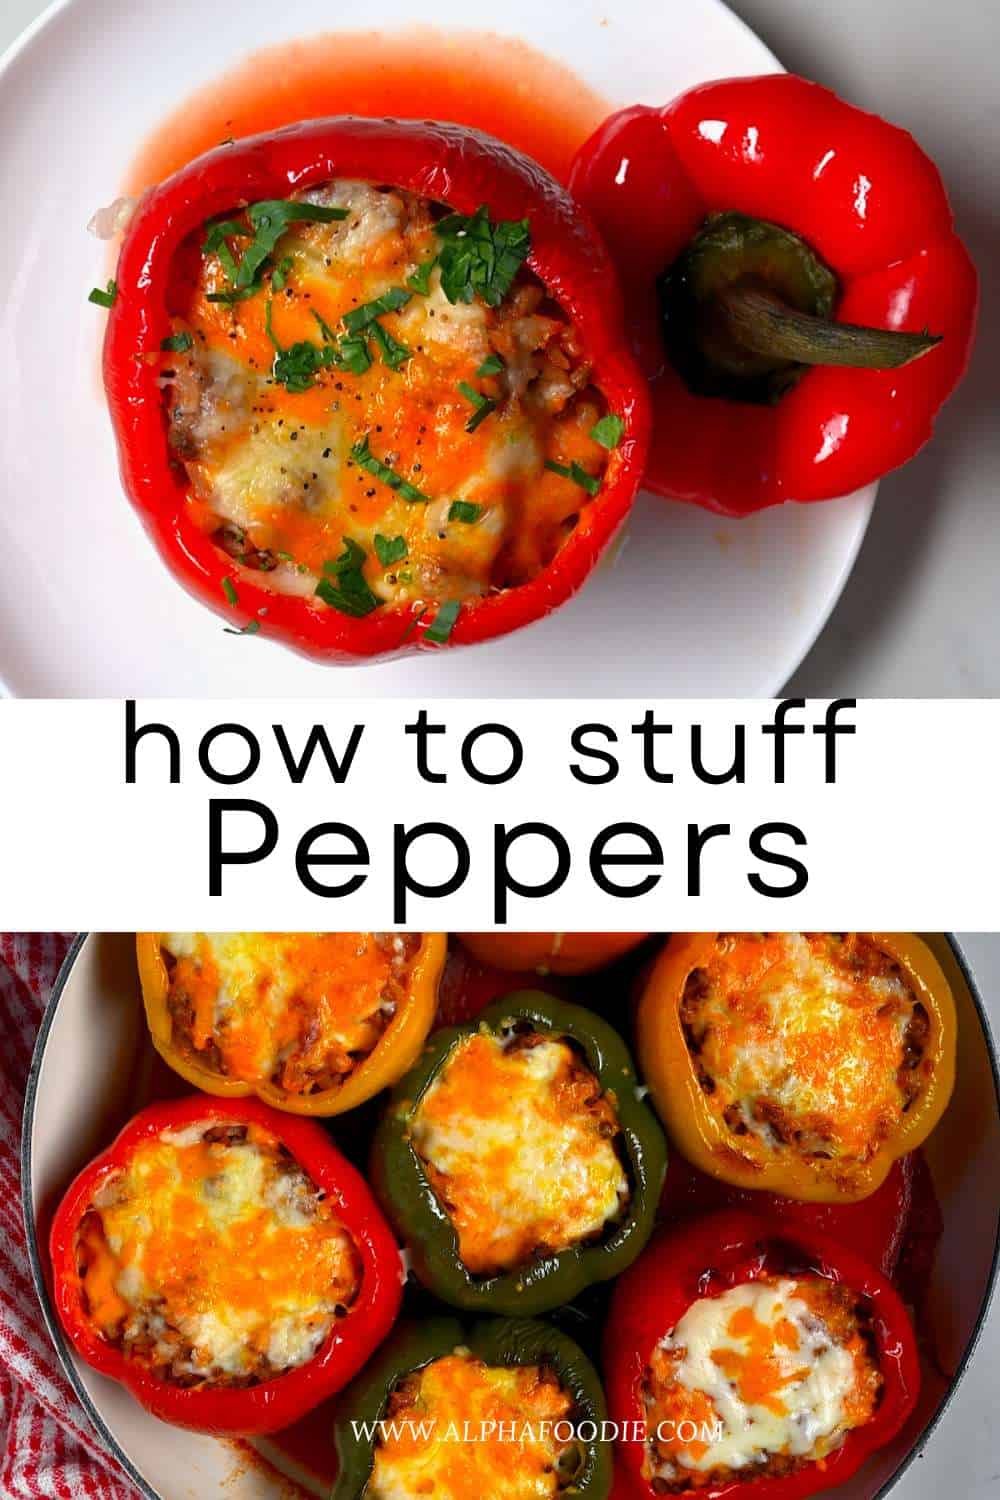 Stuffed Bell Peppers Recipe - Alphafoodie